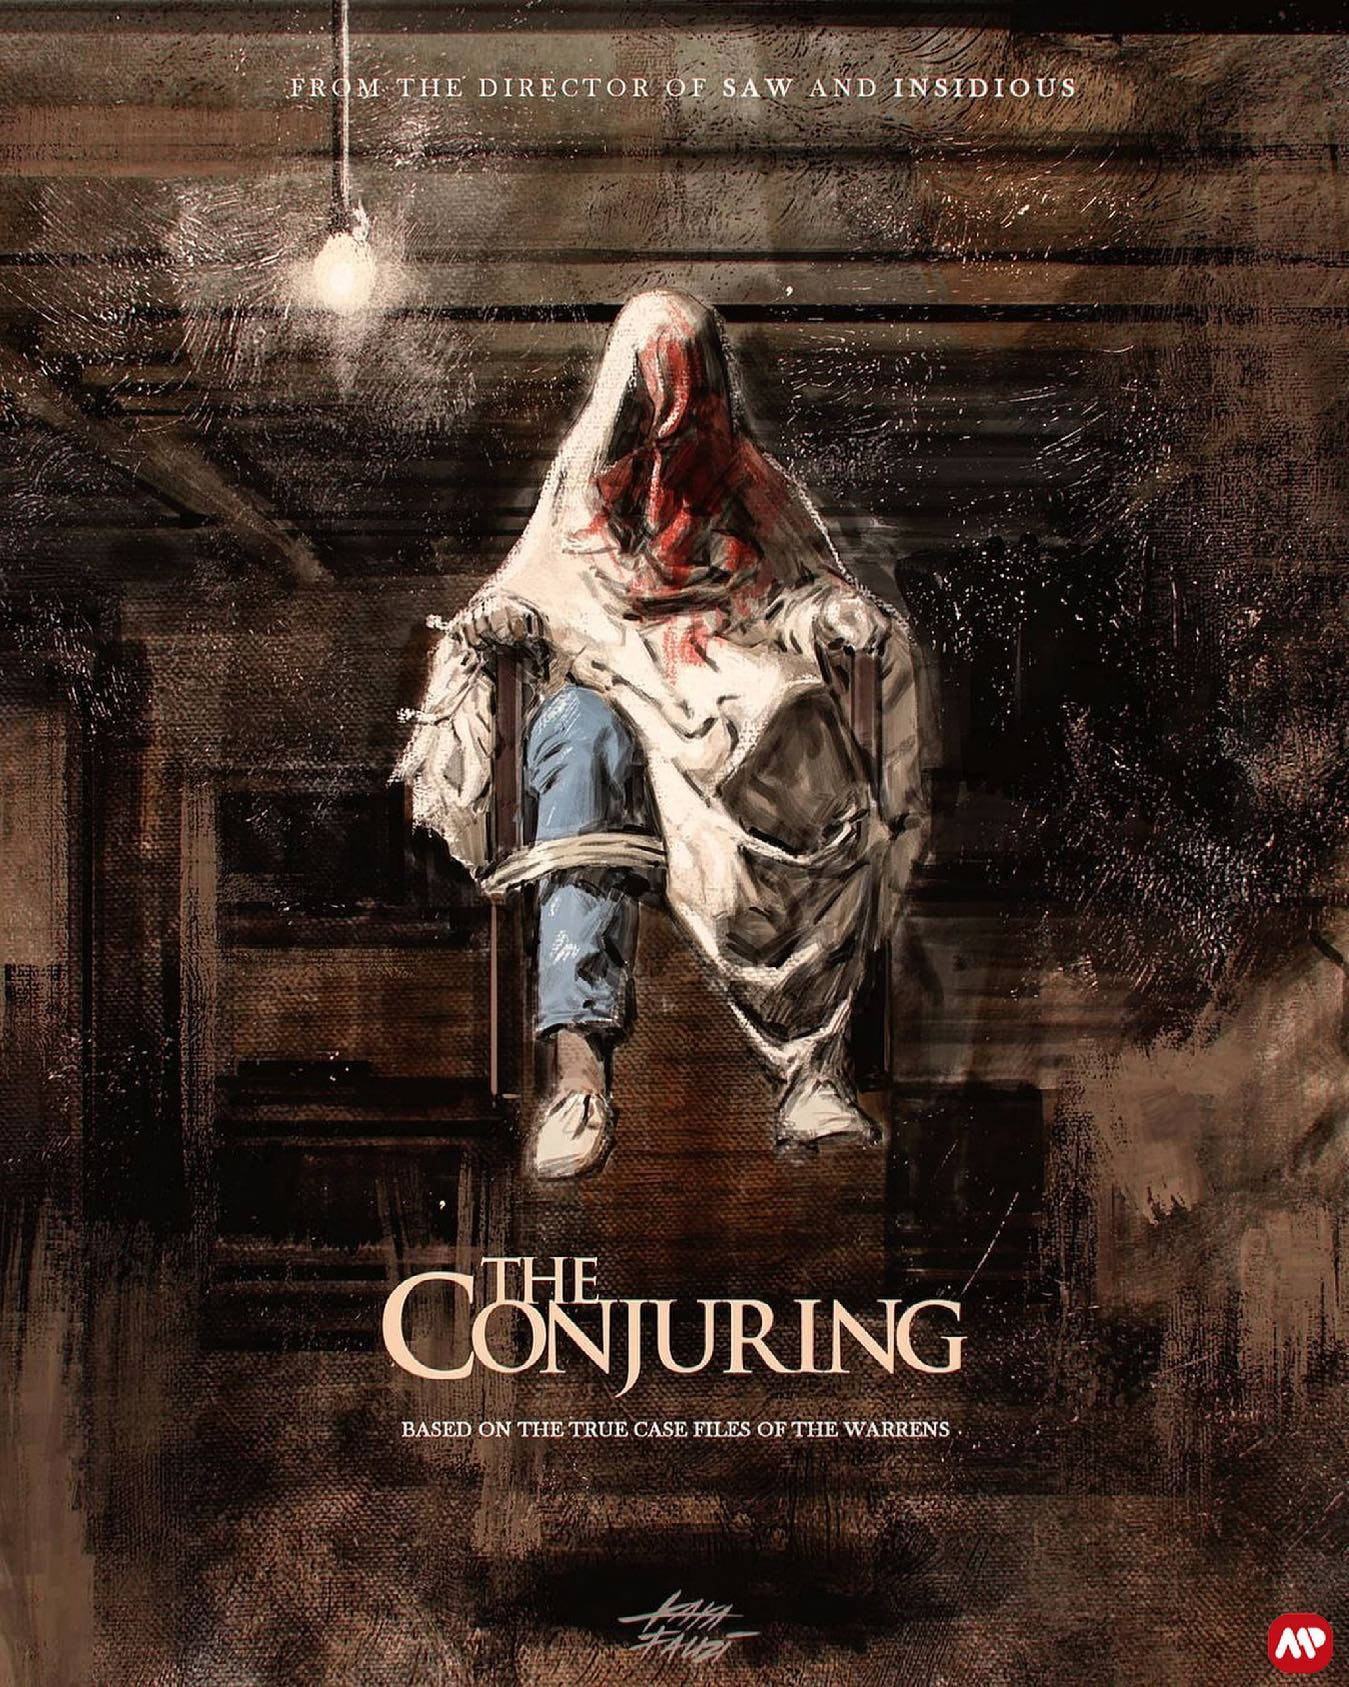 The Conjuring Possessed Floating Art Poster Background